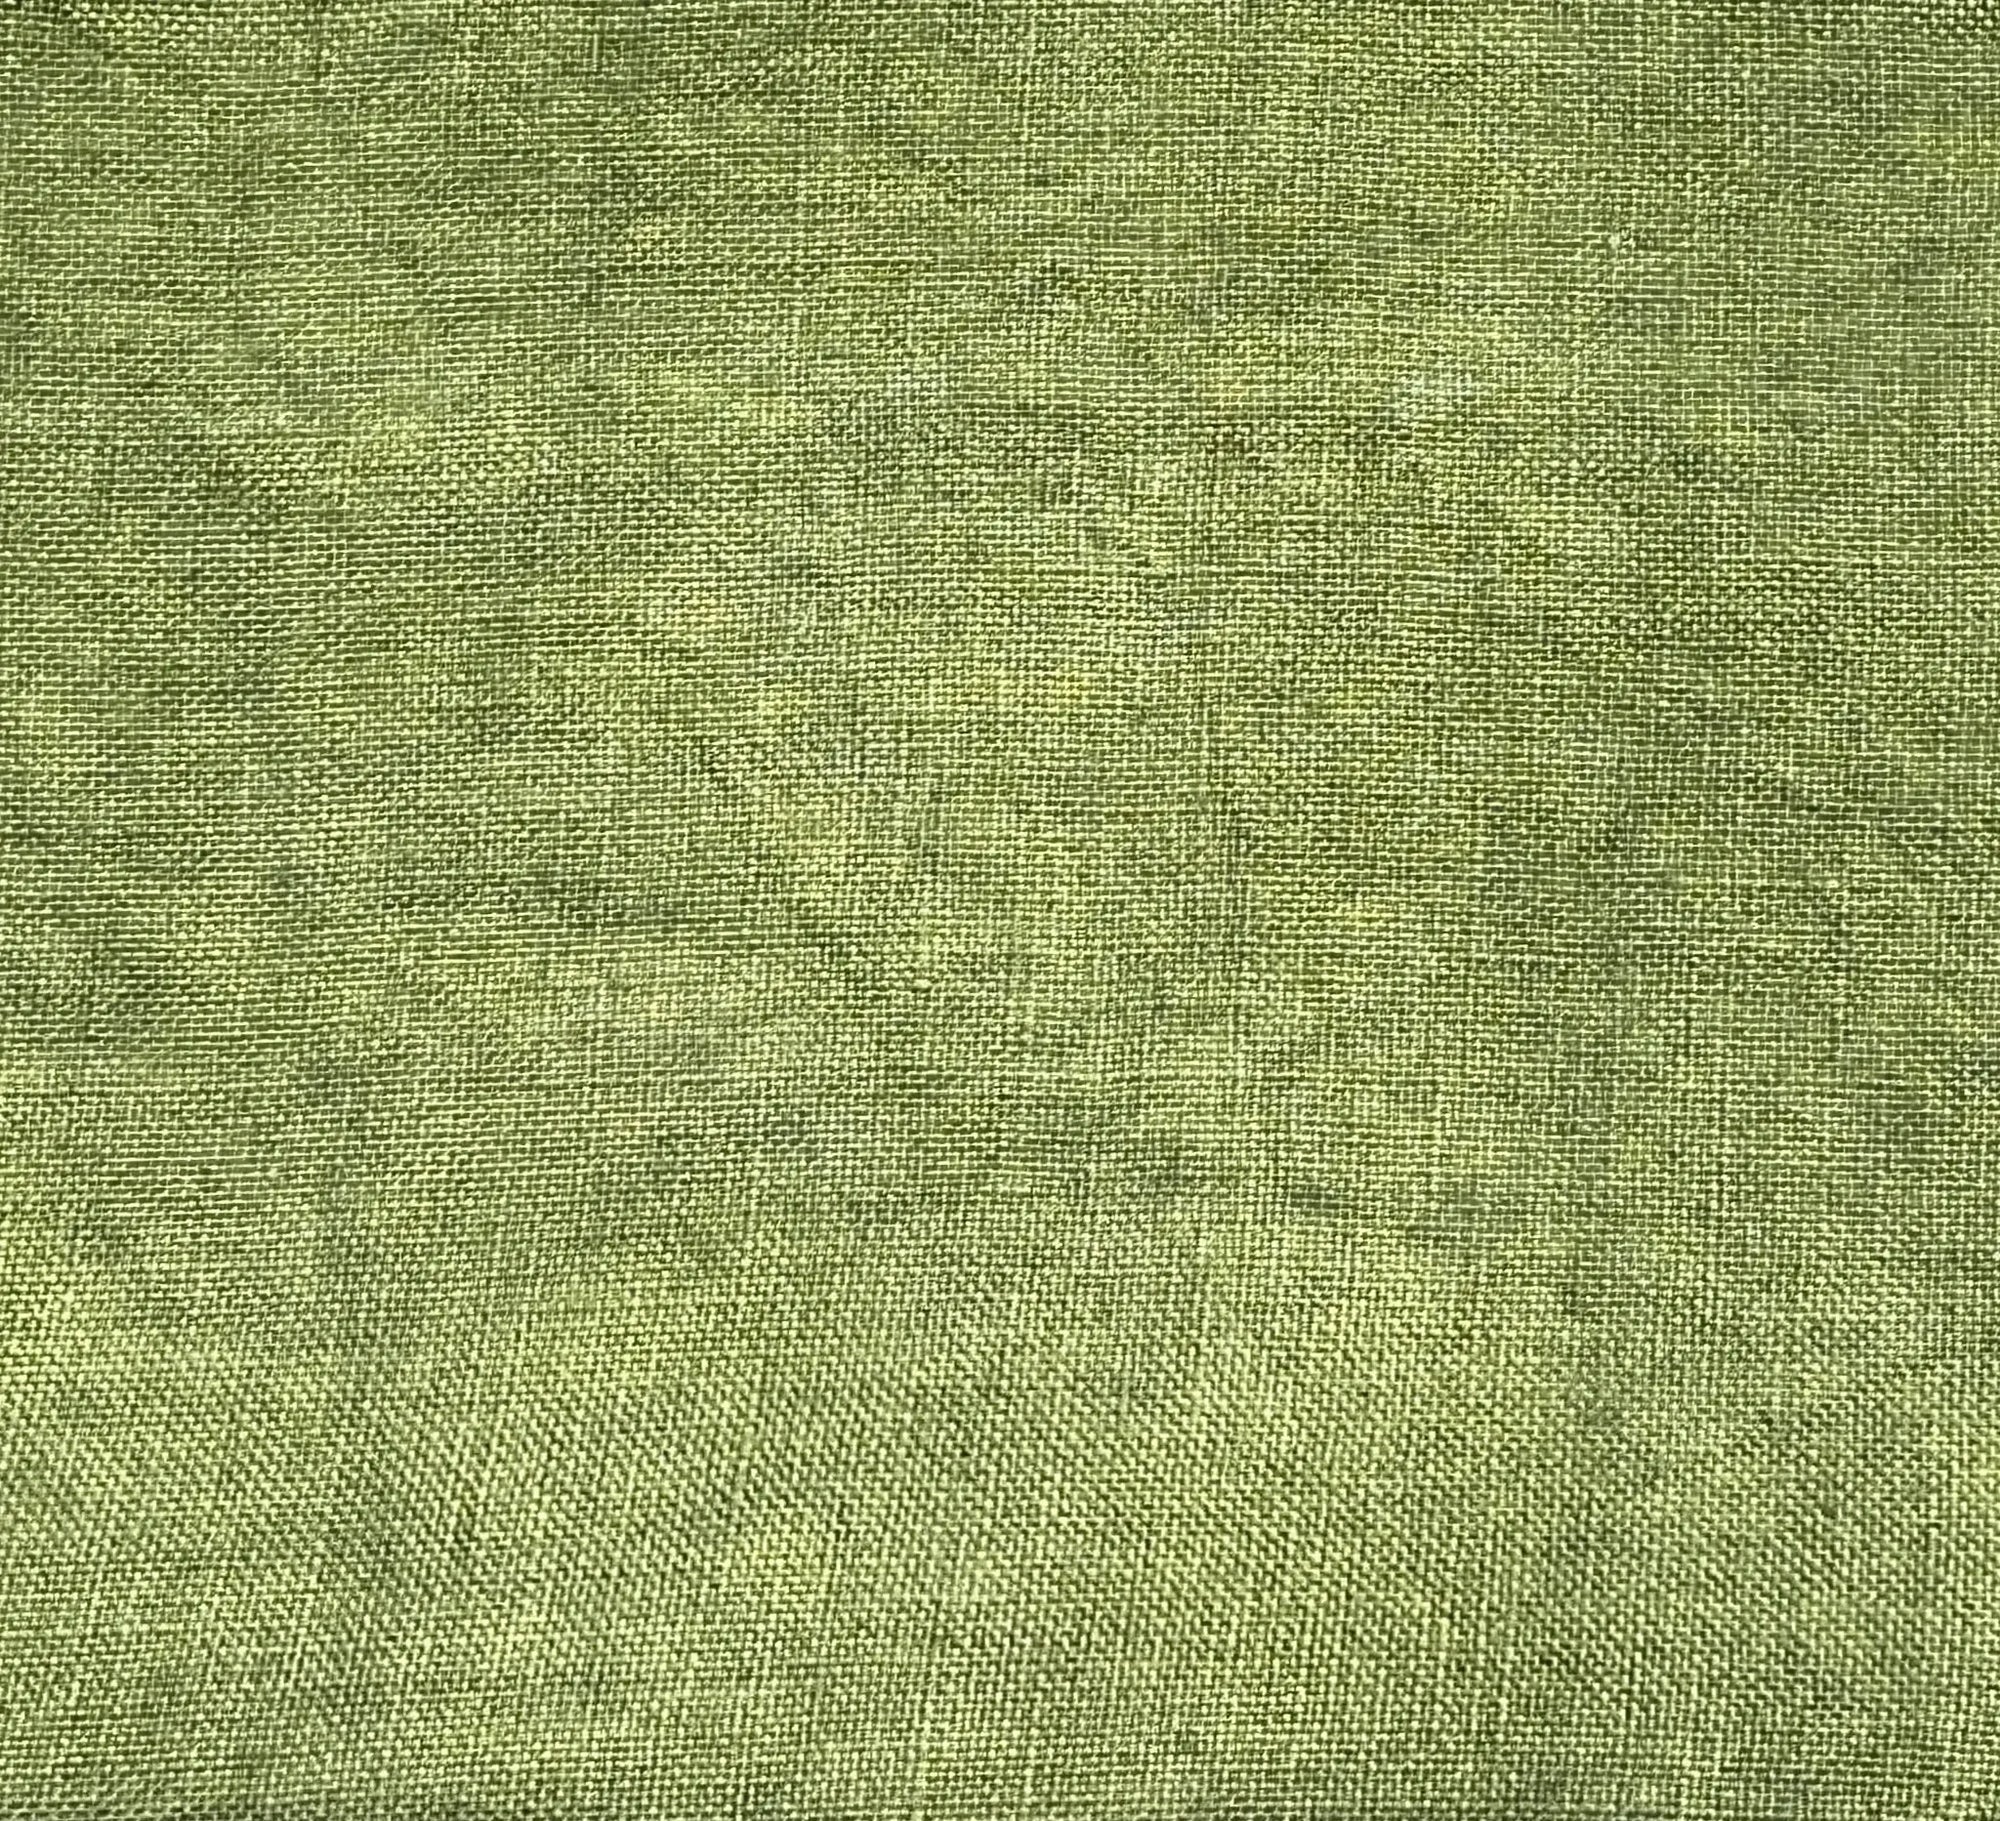 Newcastle Linen Moss (40 ct) by Seraphim Hand Dyed Fabrics Seraphim Hand Dyed Fabrics